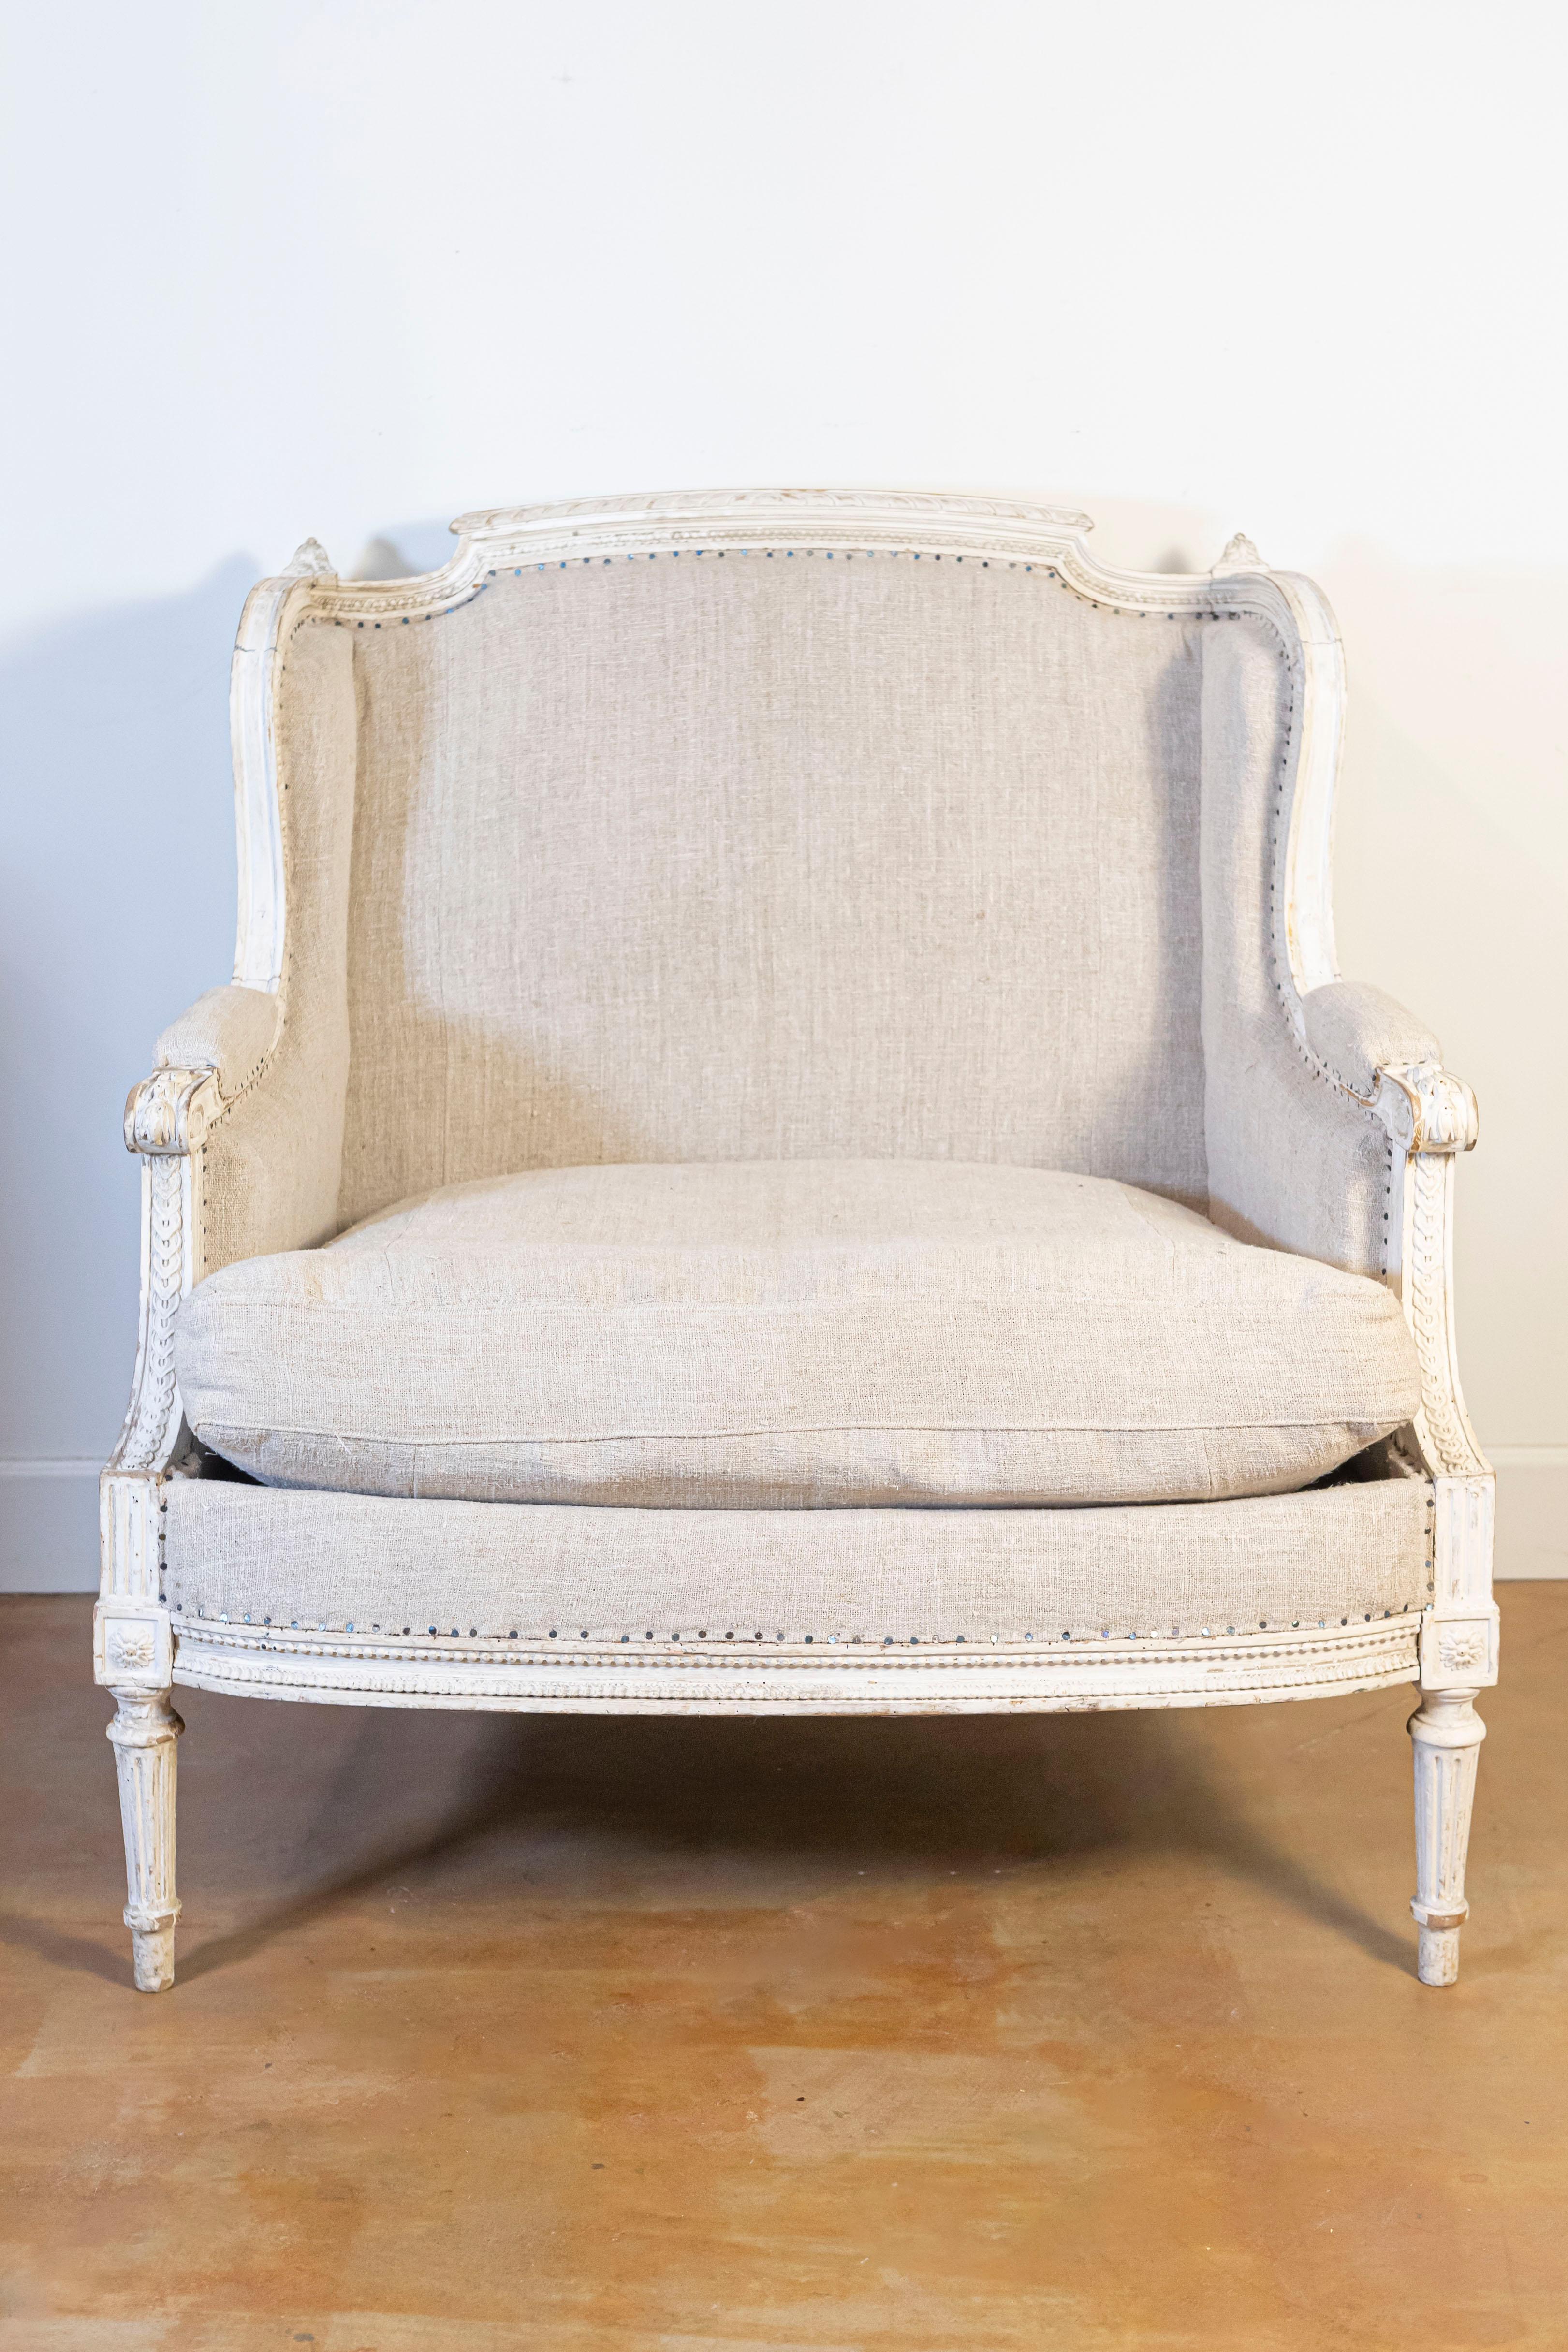 A French Louis XVI style painted and carved wood marquise wingback chair from the 20th century, with new upholstery. Created in France during the 20th century, this marquise chair features a straight back, topped with a carved upper rail flanked